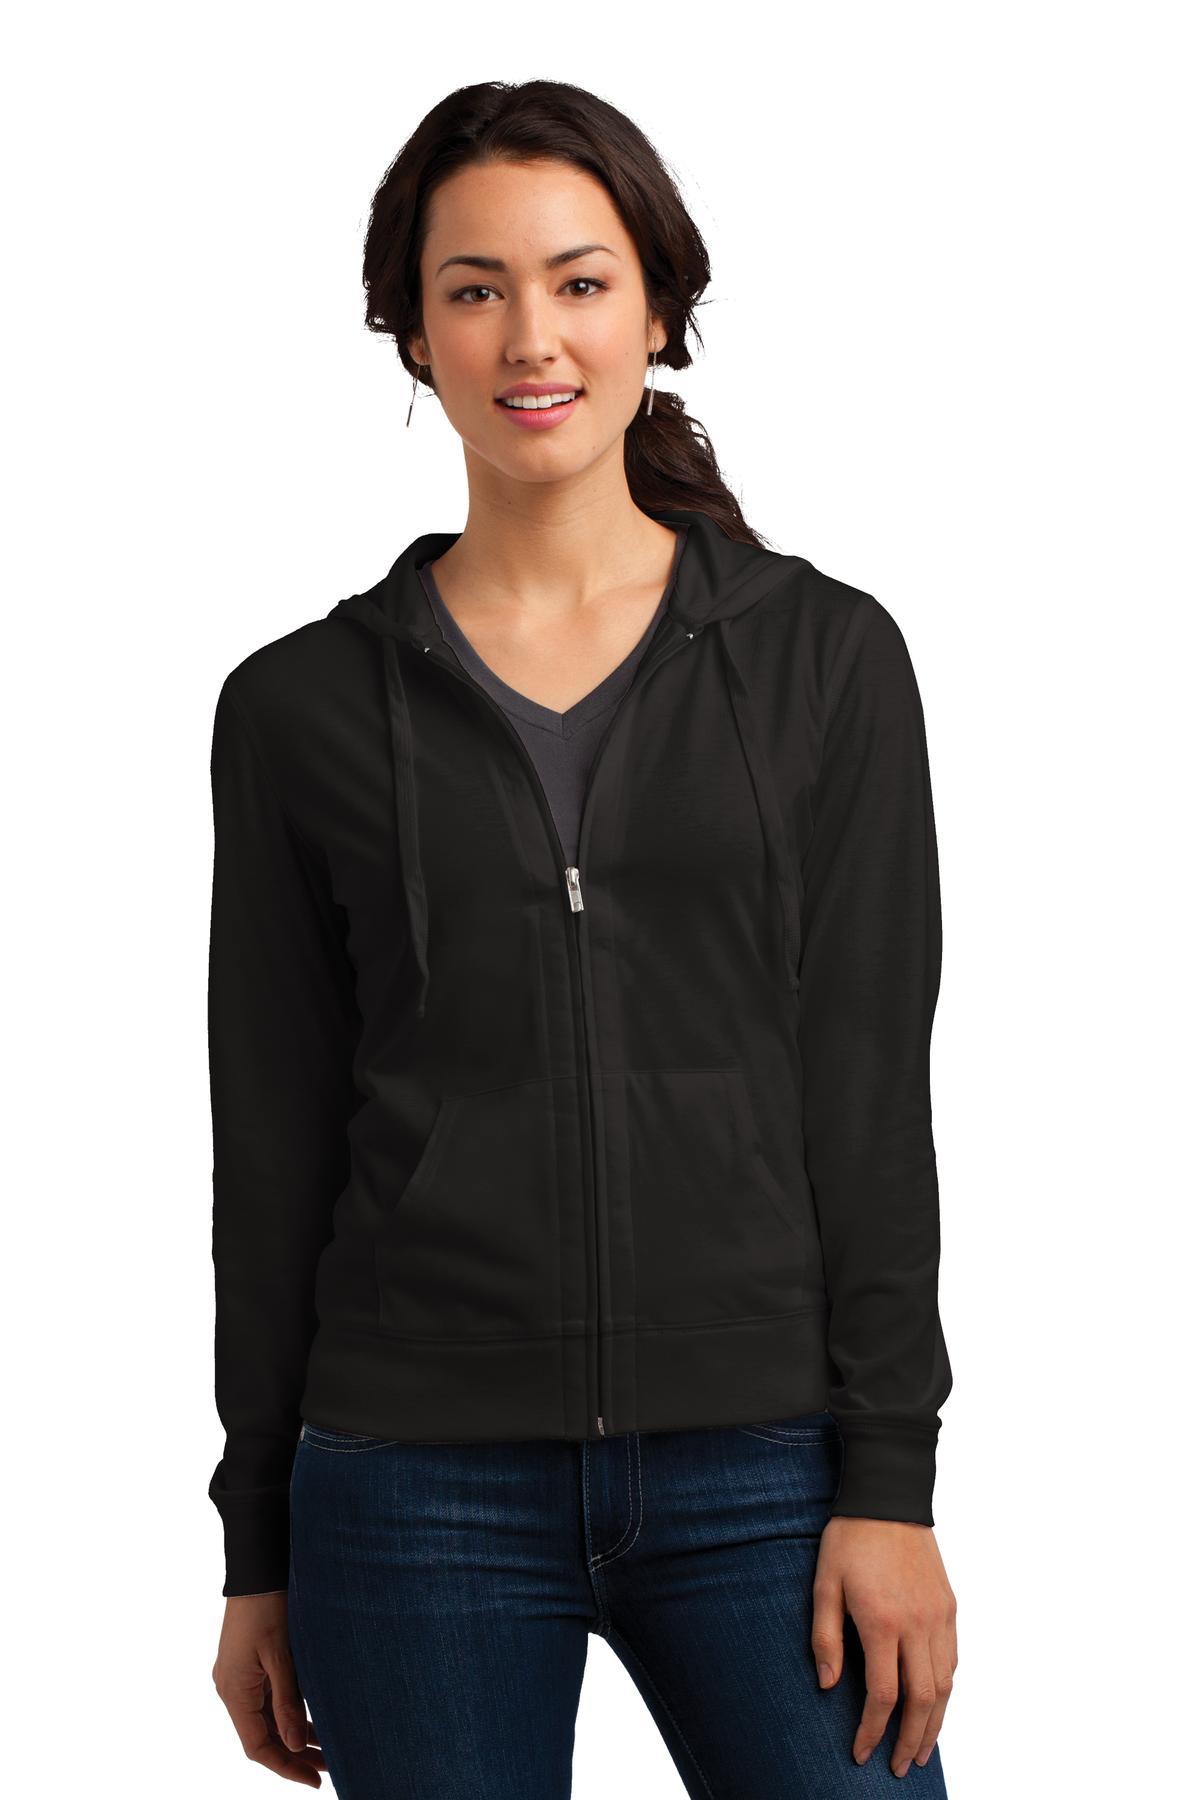 District Women's Fitted Jersey Full-Zip Hoodie. DT2100 - Dresses Max